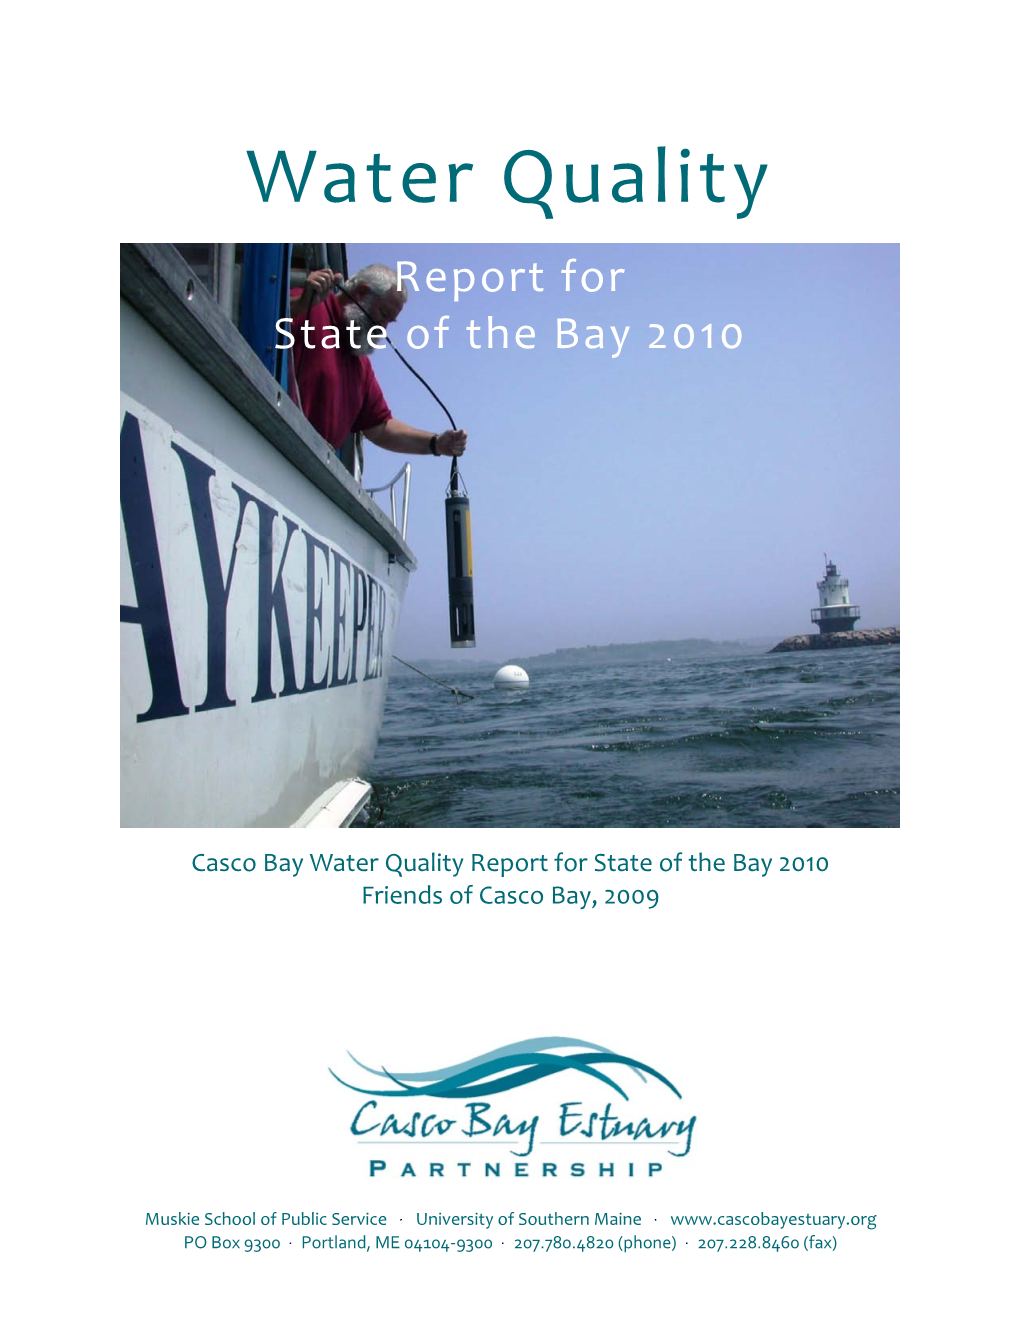 Water Quality Report for State of the Bay 2010